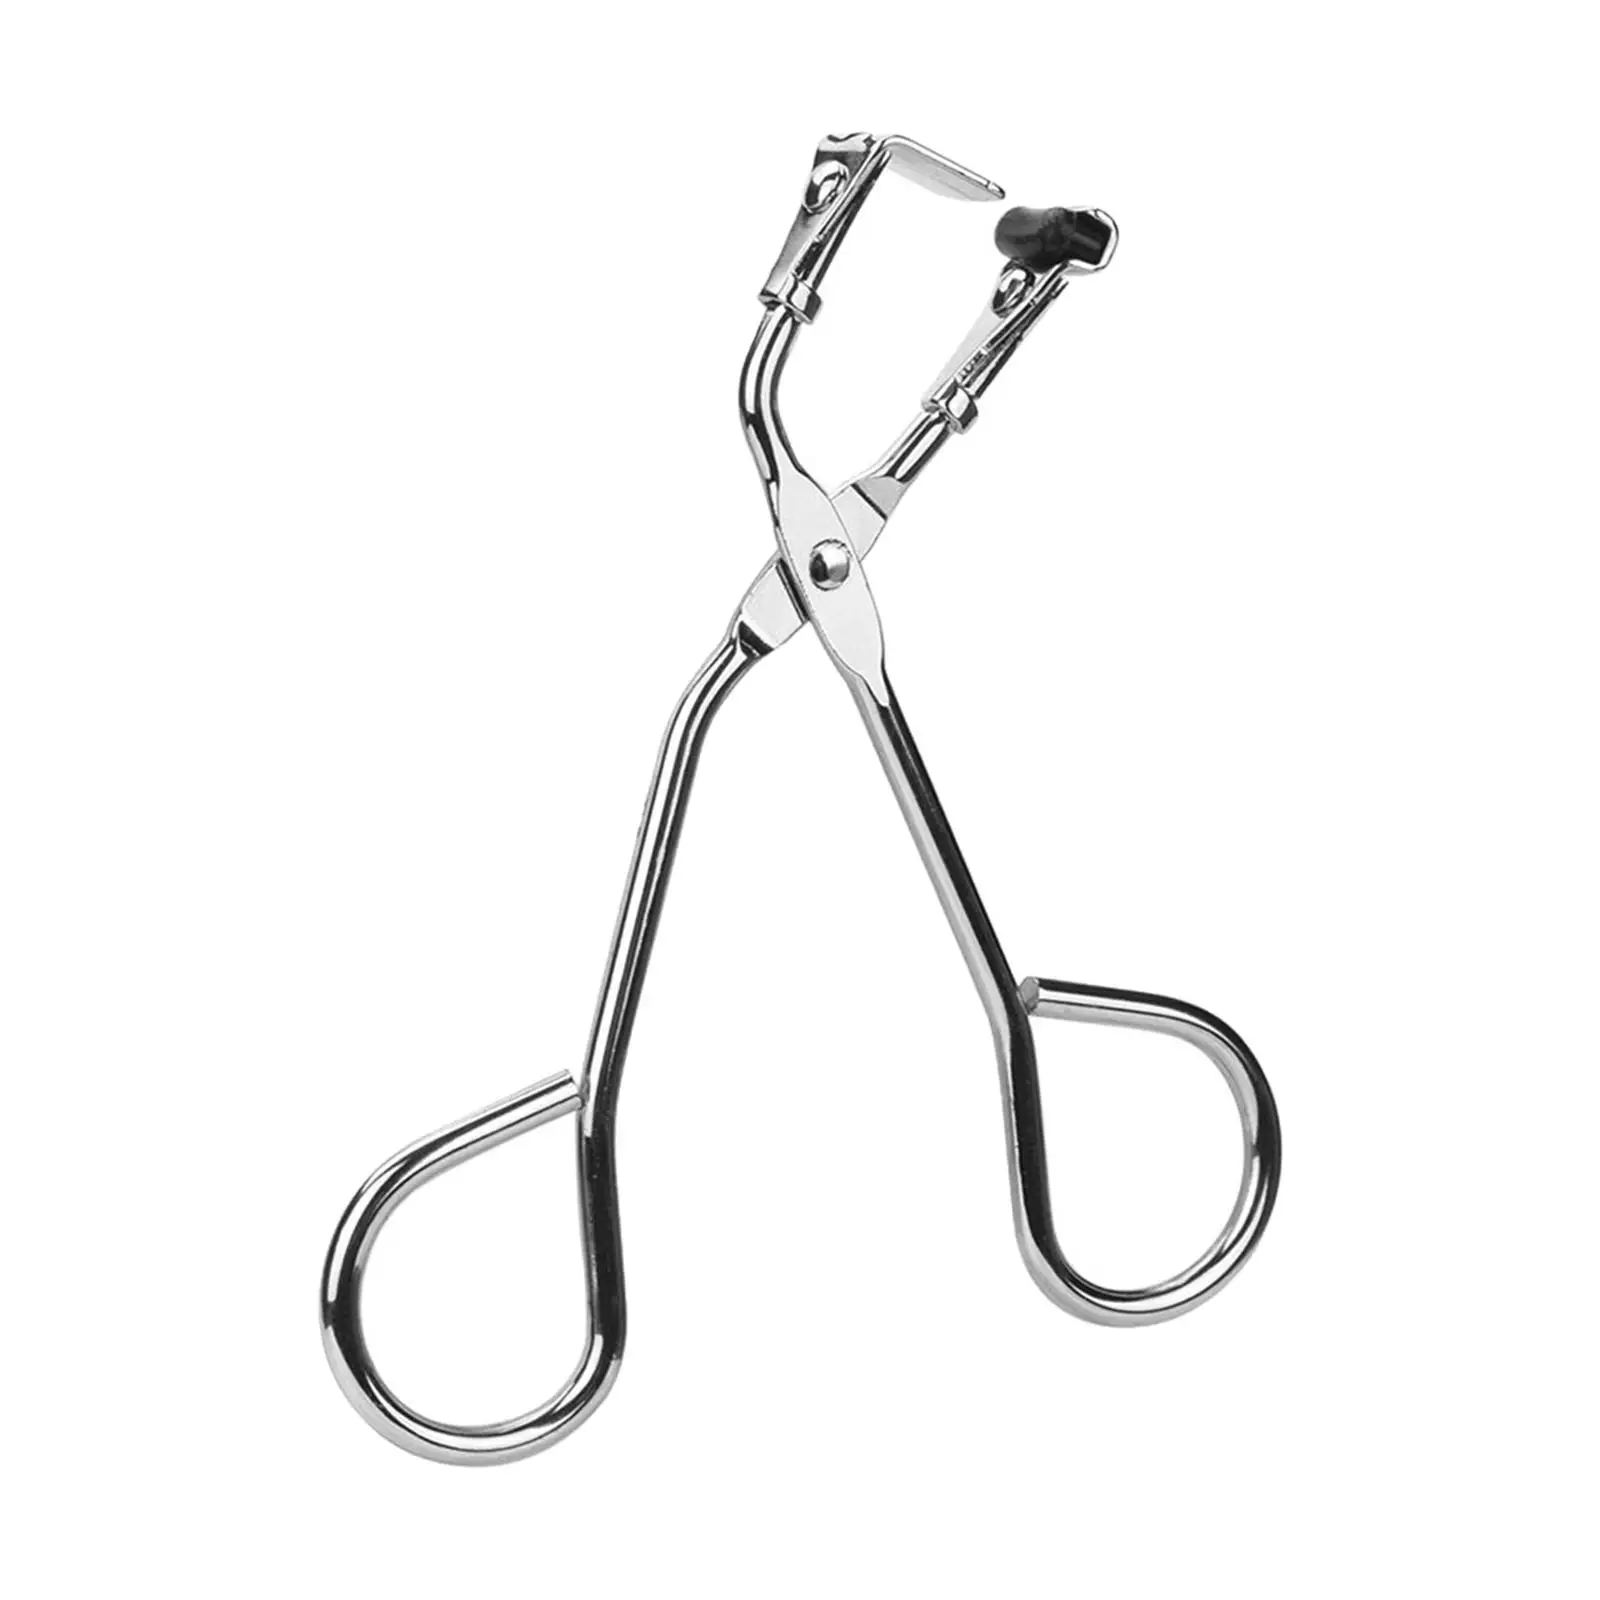 Professional Mini Eyelash Curler Lifts & Shapes Stainless Steel Precision Control, Beauty Tools Lash Curler.